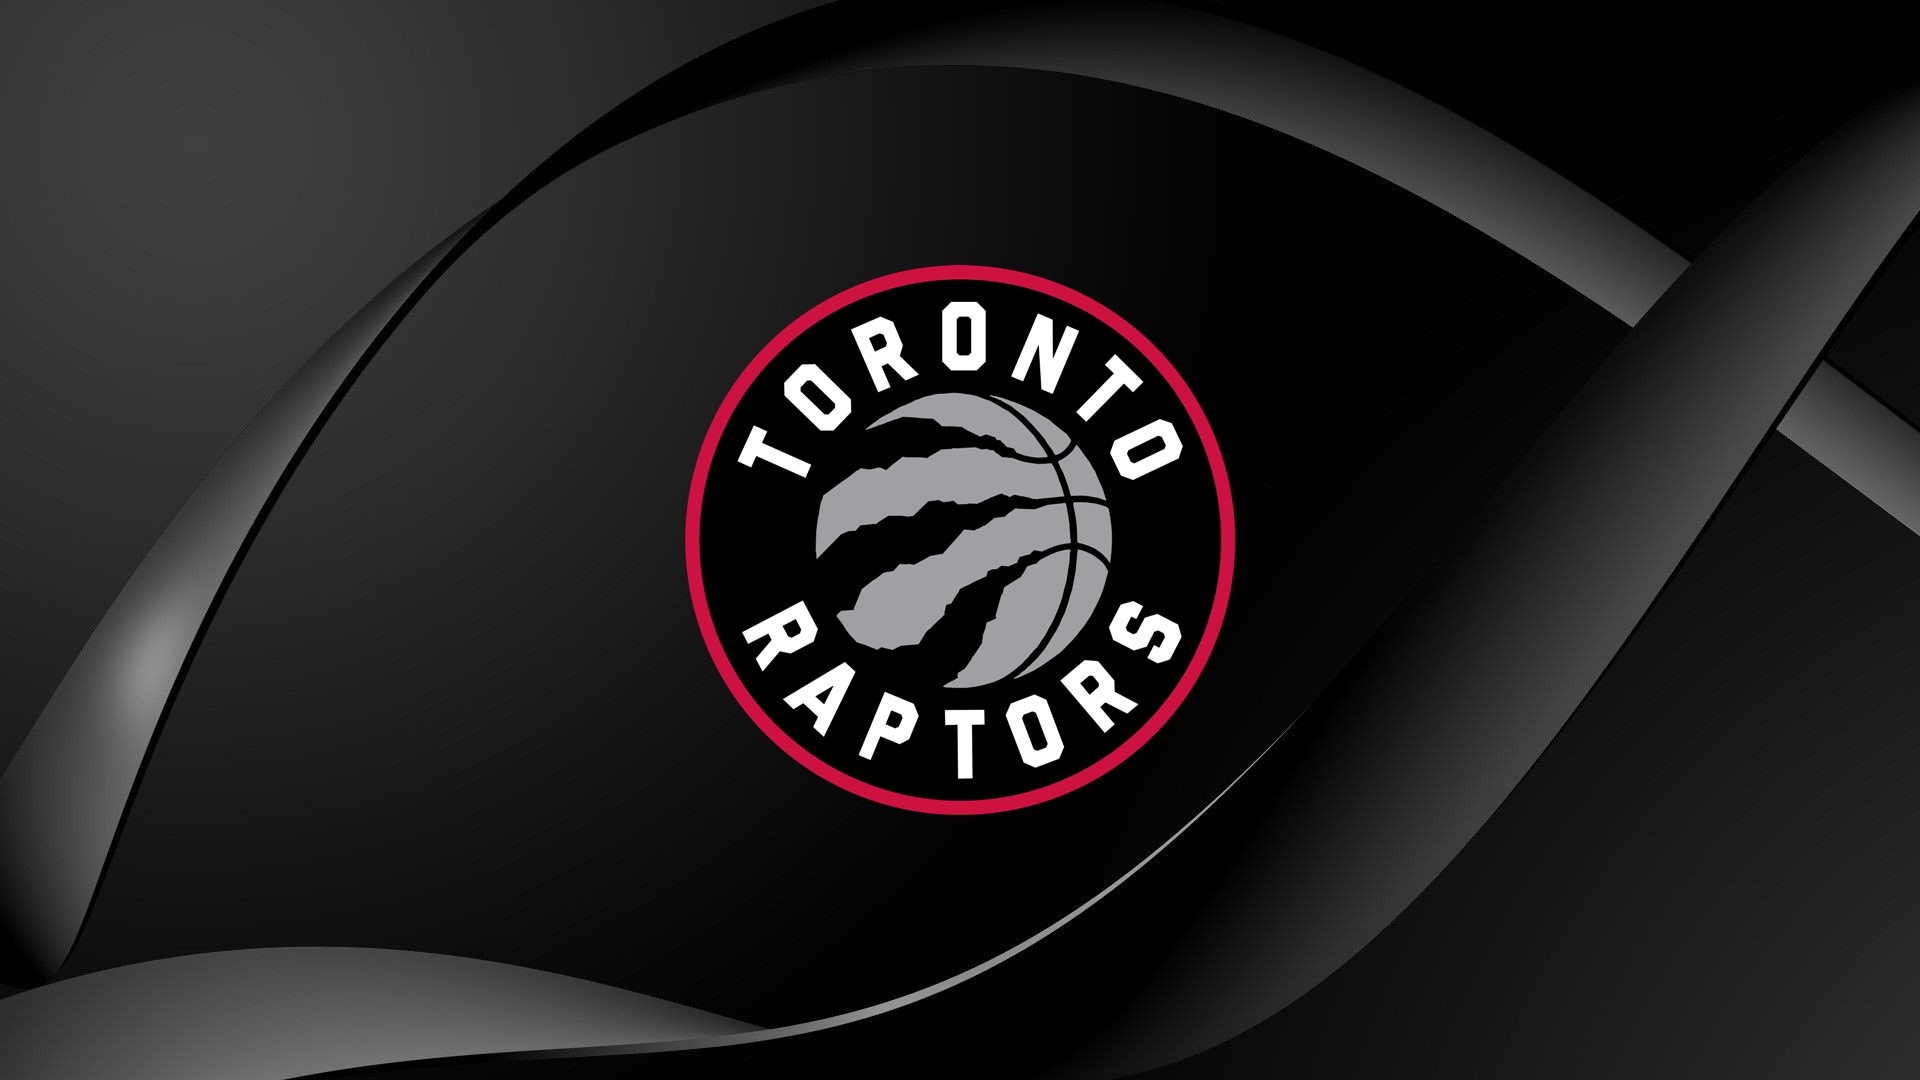 Wallpapers NBA Raptors with image dimensions 1920x1080 pixel. You can make this wallpaper for your Desktop Computer Backgrounds, Windows or Mac Screensavers, iPhone Lock screen, Tablet or Android and another Mobile Phone device